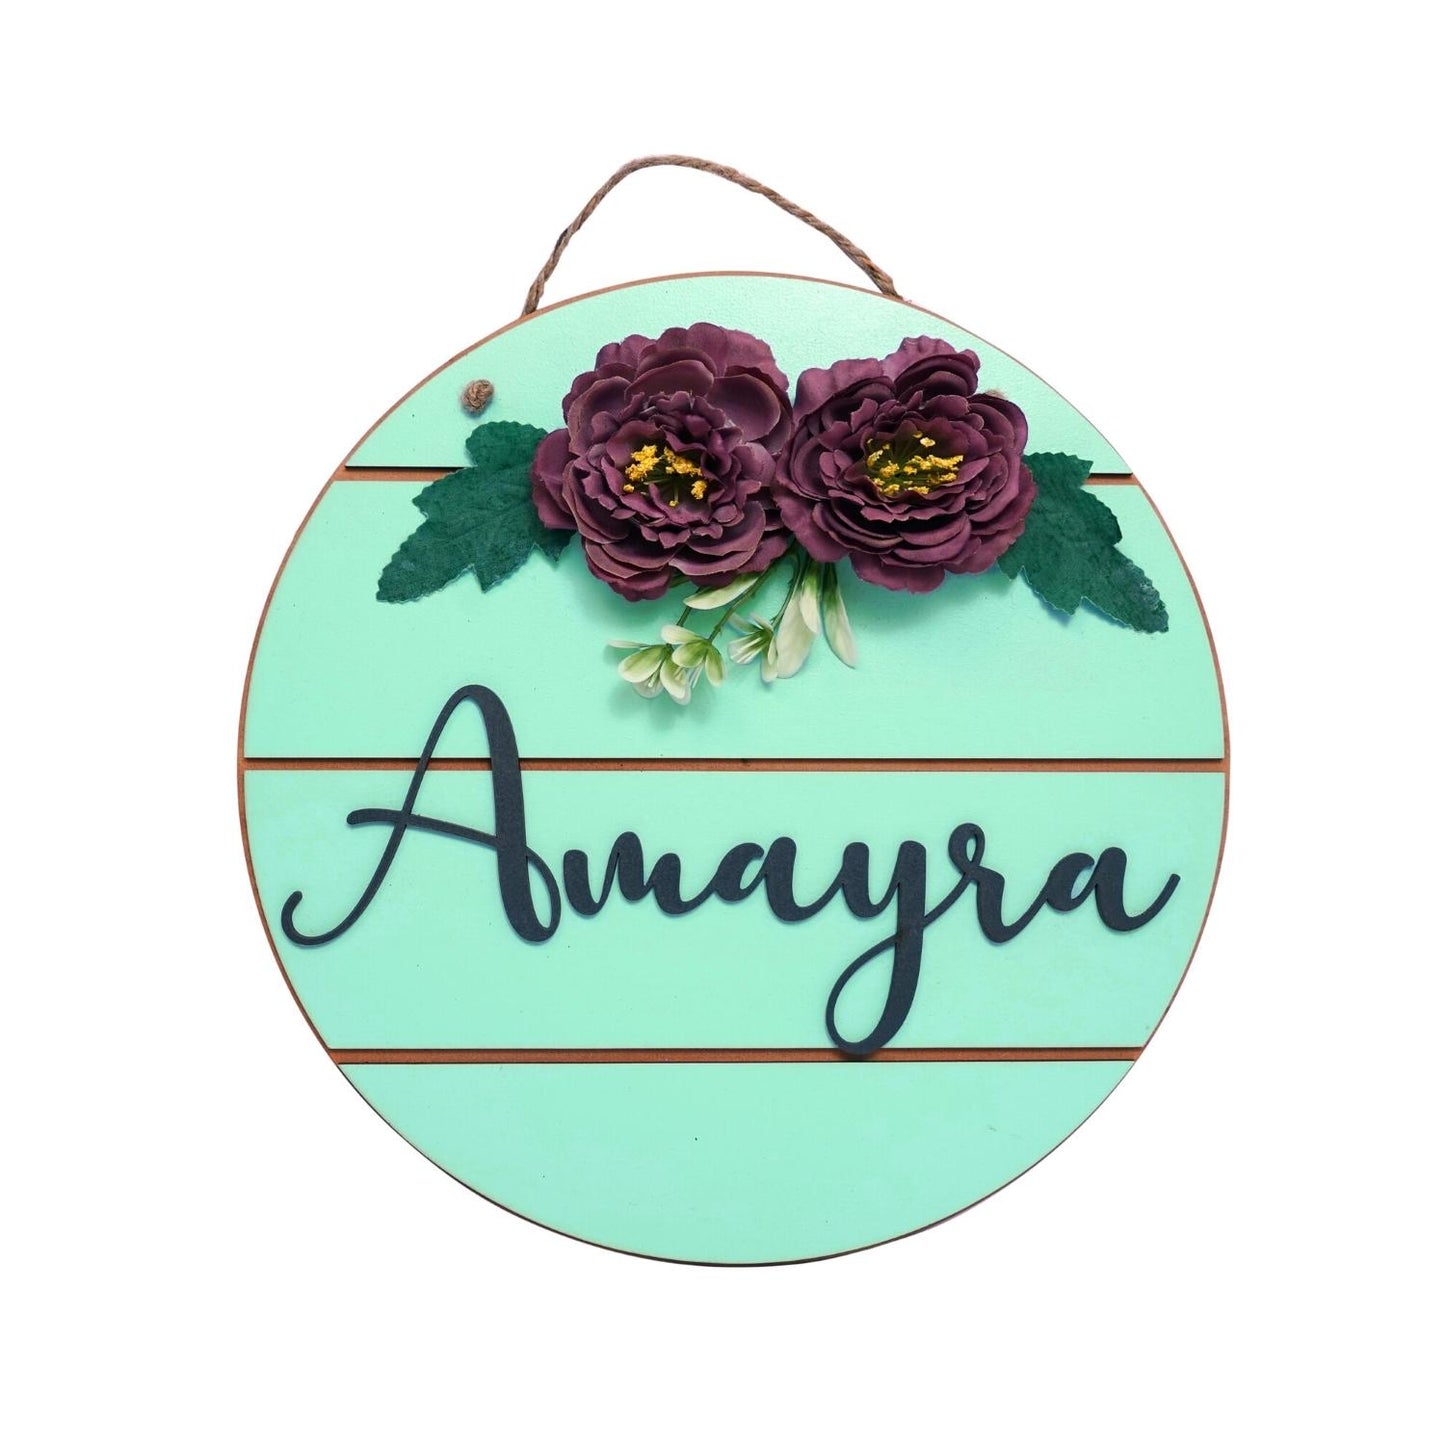 Kids Room Nameplate Styled With Flowers and Jute Rope Personalized Now